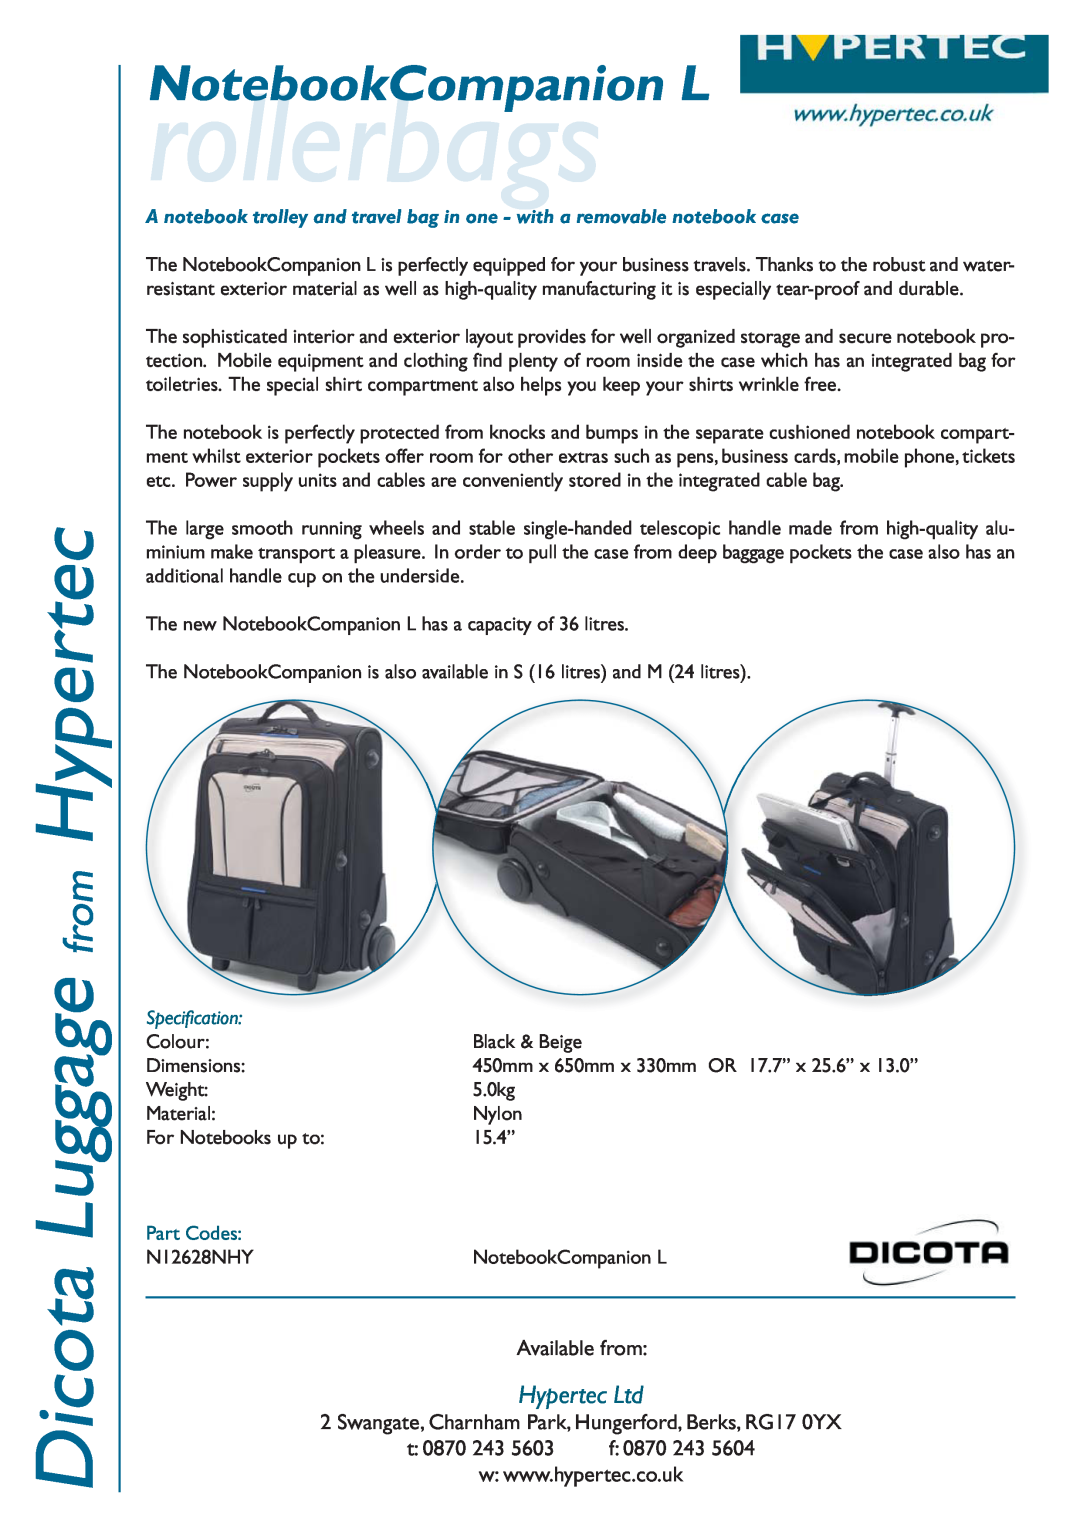 Dicota N12628NHY dimensions rollerbags, Dicota Luggage from Hypertec, NotebookCompanion L, Available from, t 0870 243 